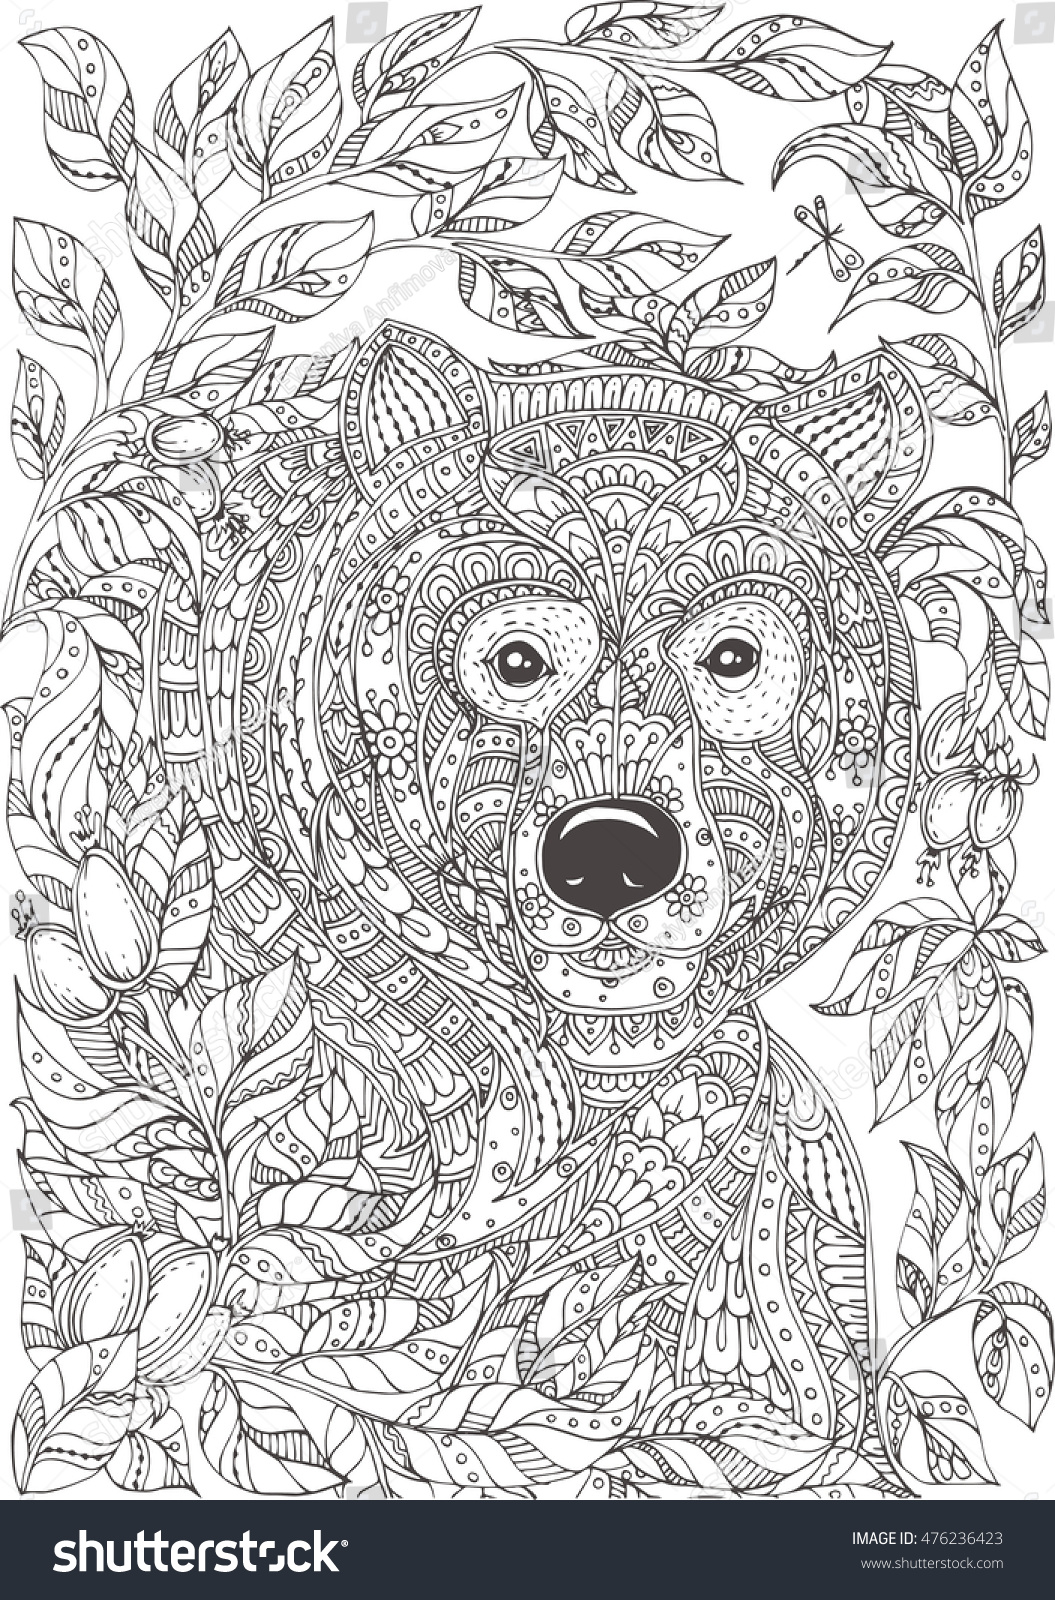 Bear Bushes Ethnic Floral Doodle Pattern Stock Vector (Royalty Free ...